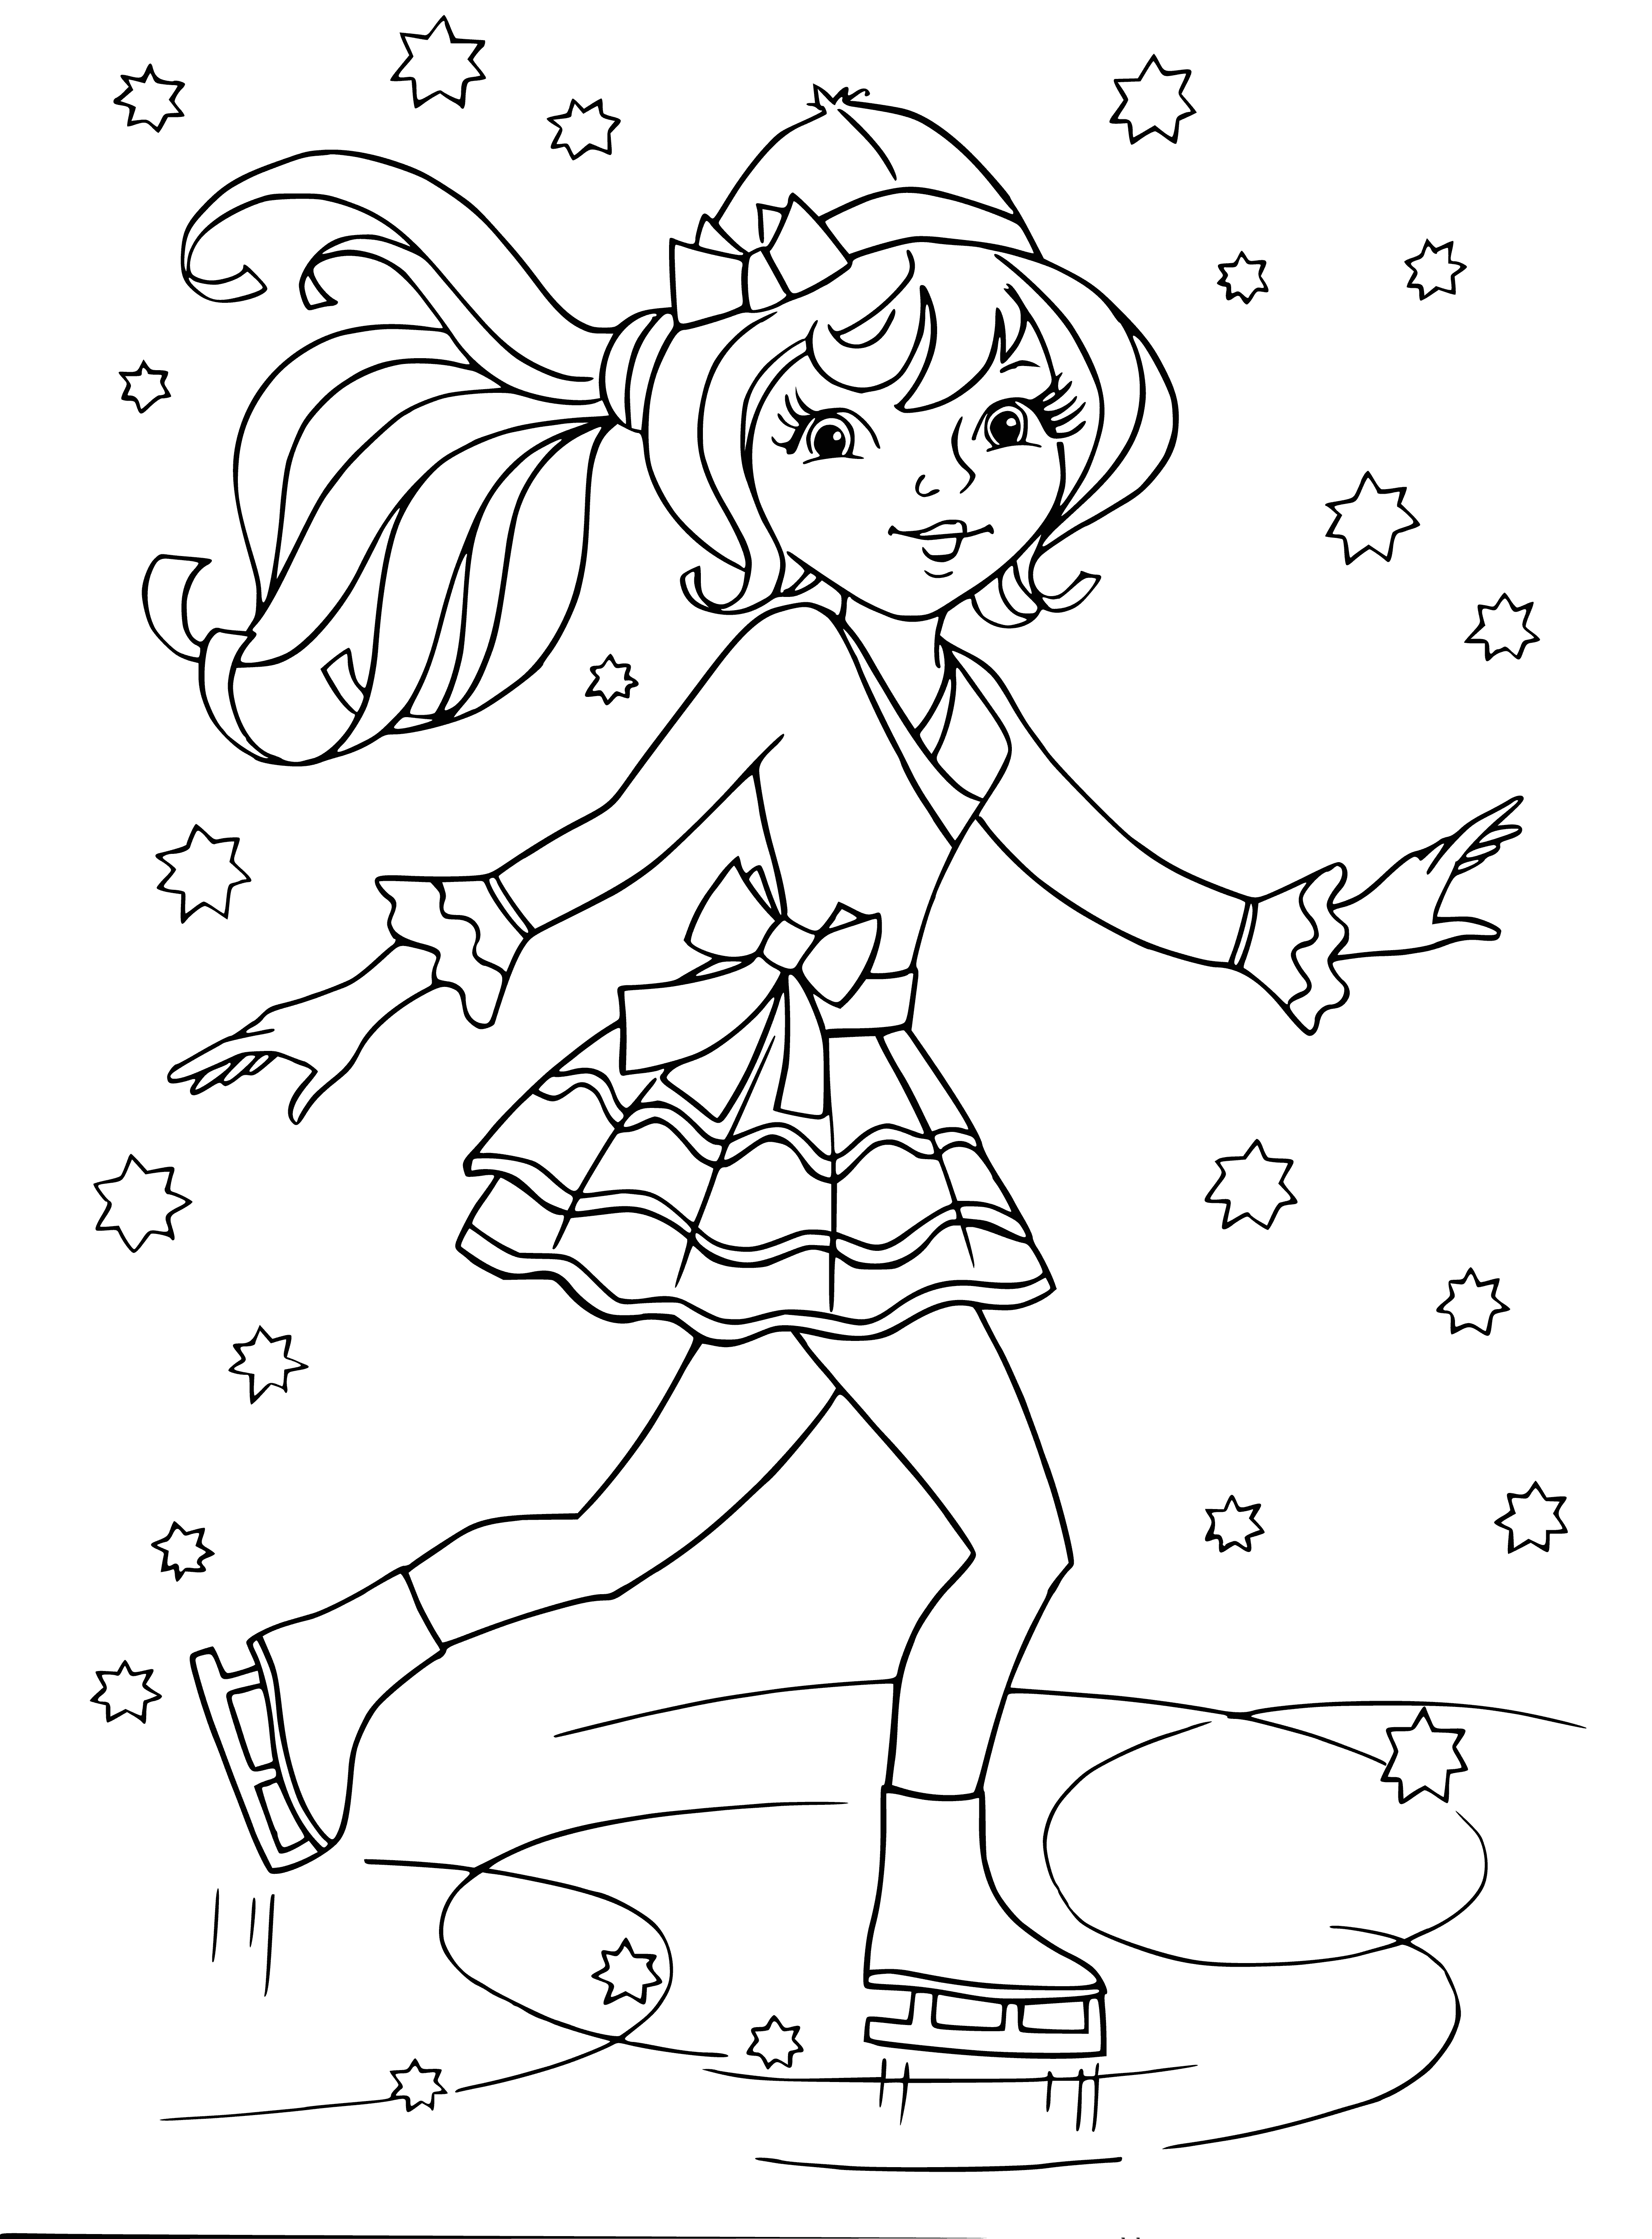 coloring page: Figure skater, wearing sleeveless white dress with silver accents, white boots, hair in bun. Holding silver cape and standing on ice, arms out.